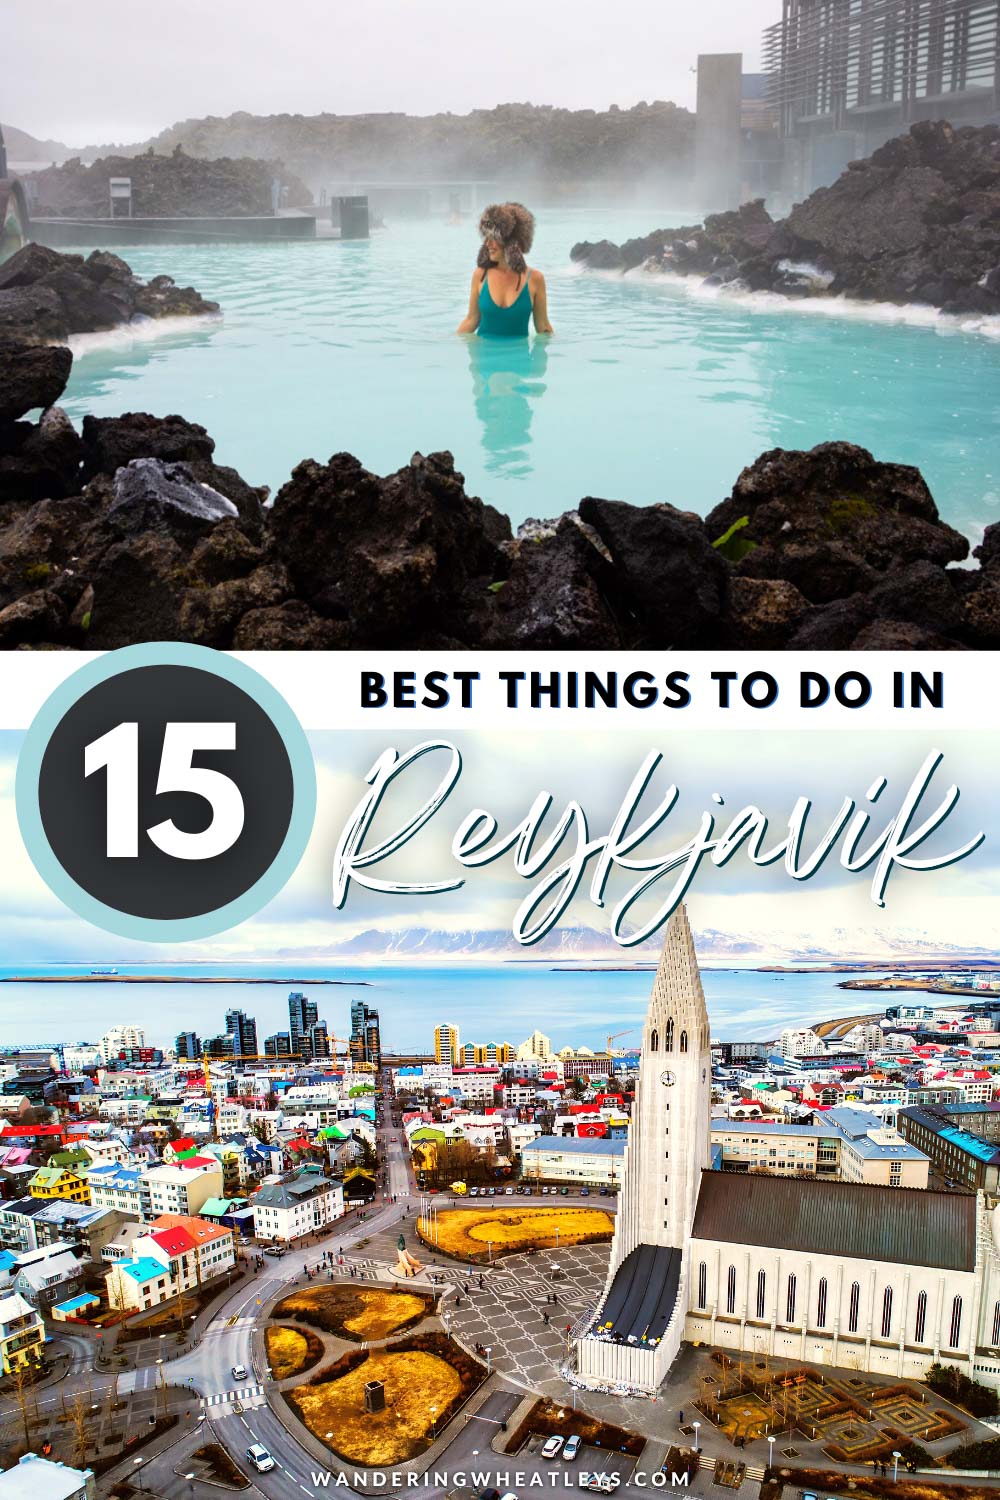 The Best Things to do in Reykjavik, Iceland